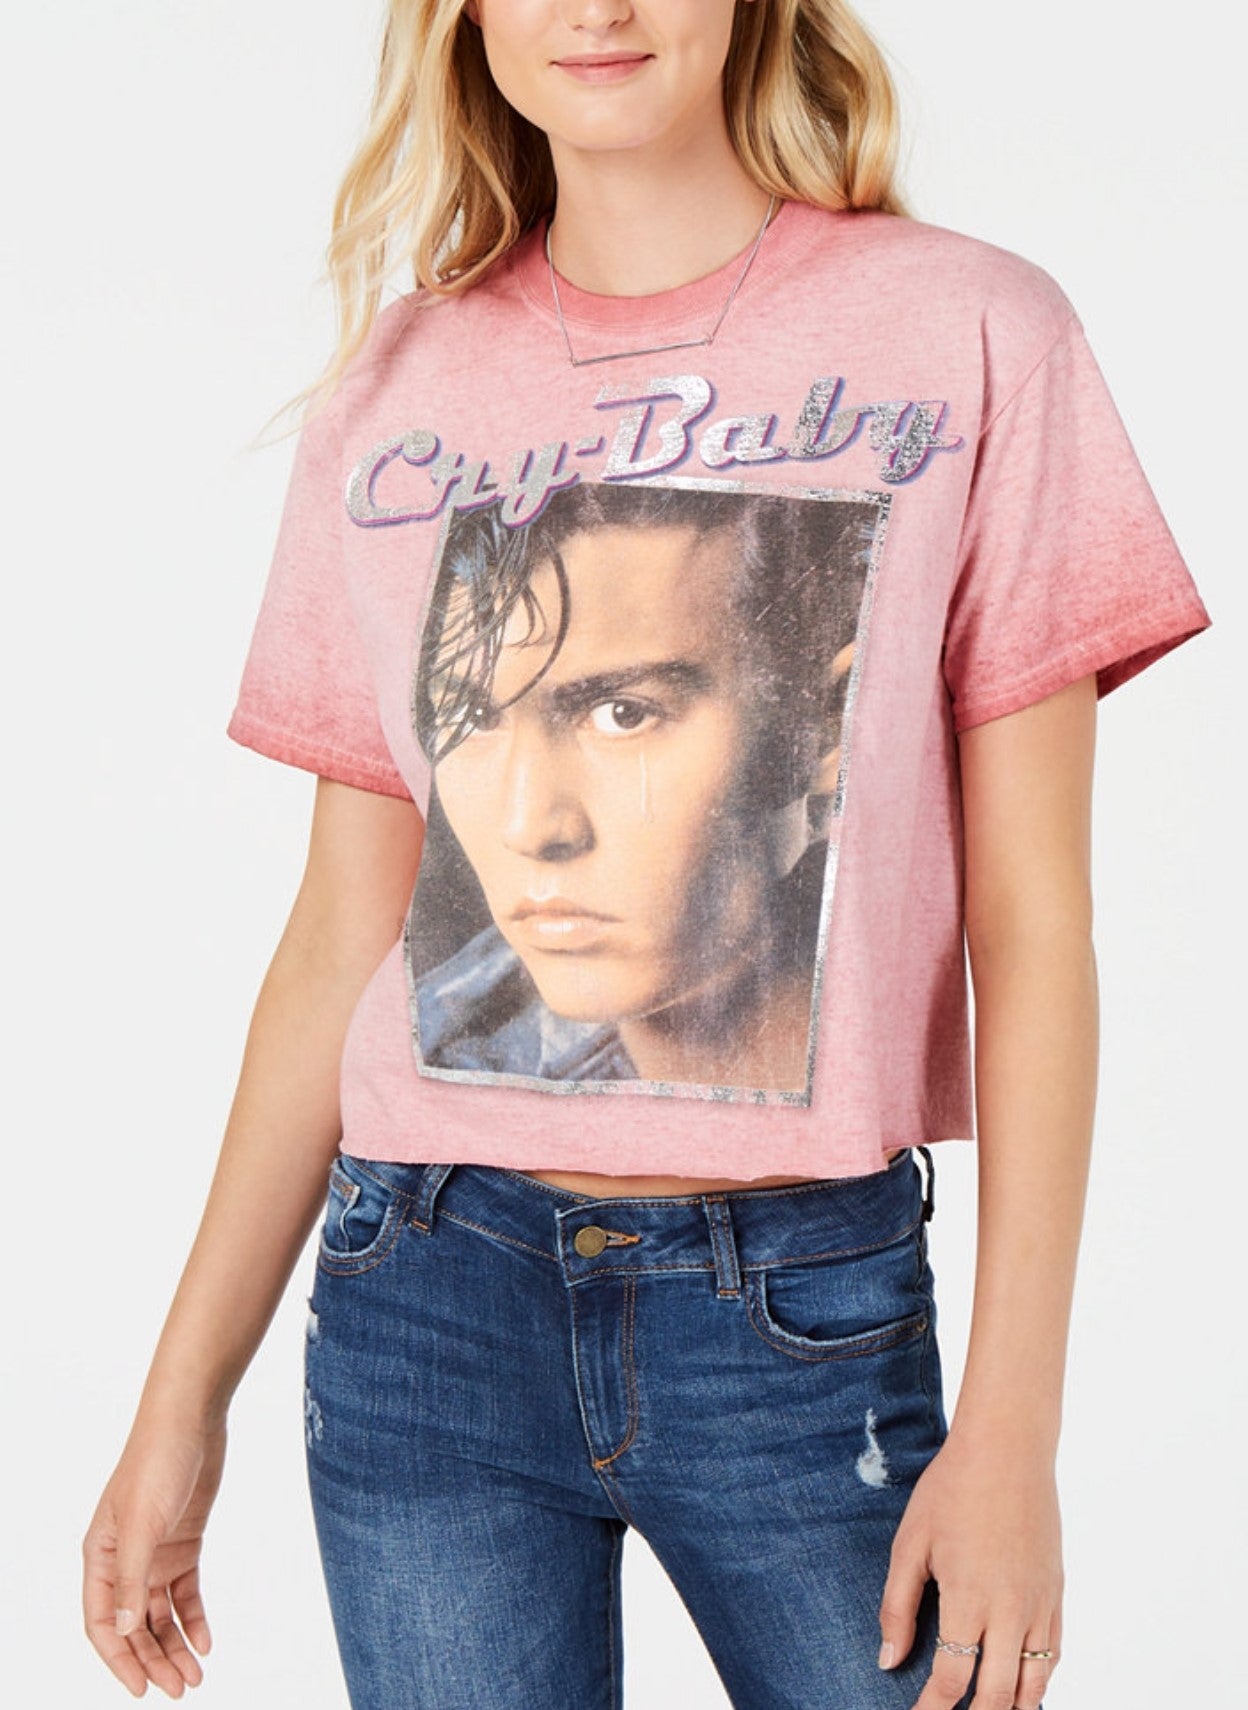 Cotton Cry-Baby-Graphic T-Shirt